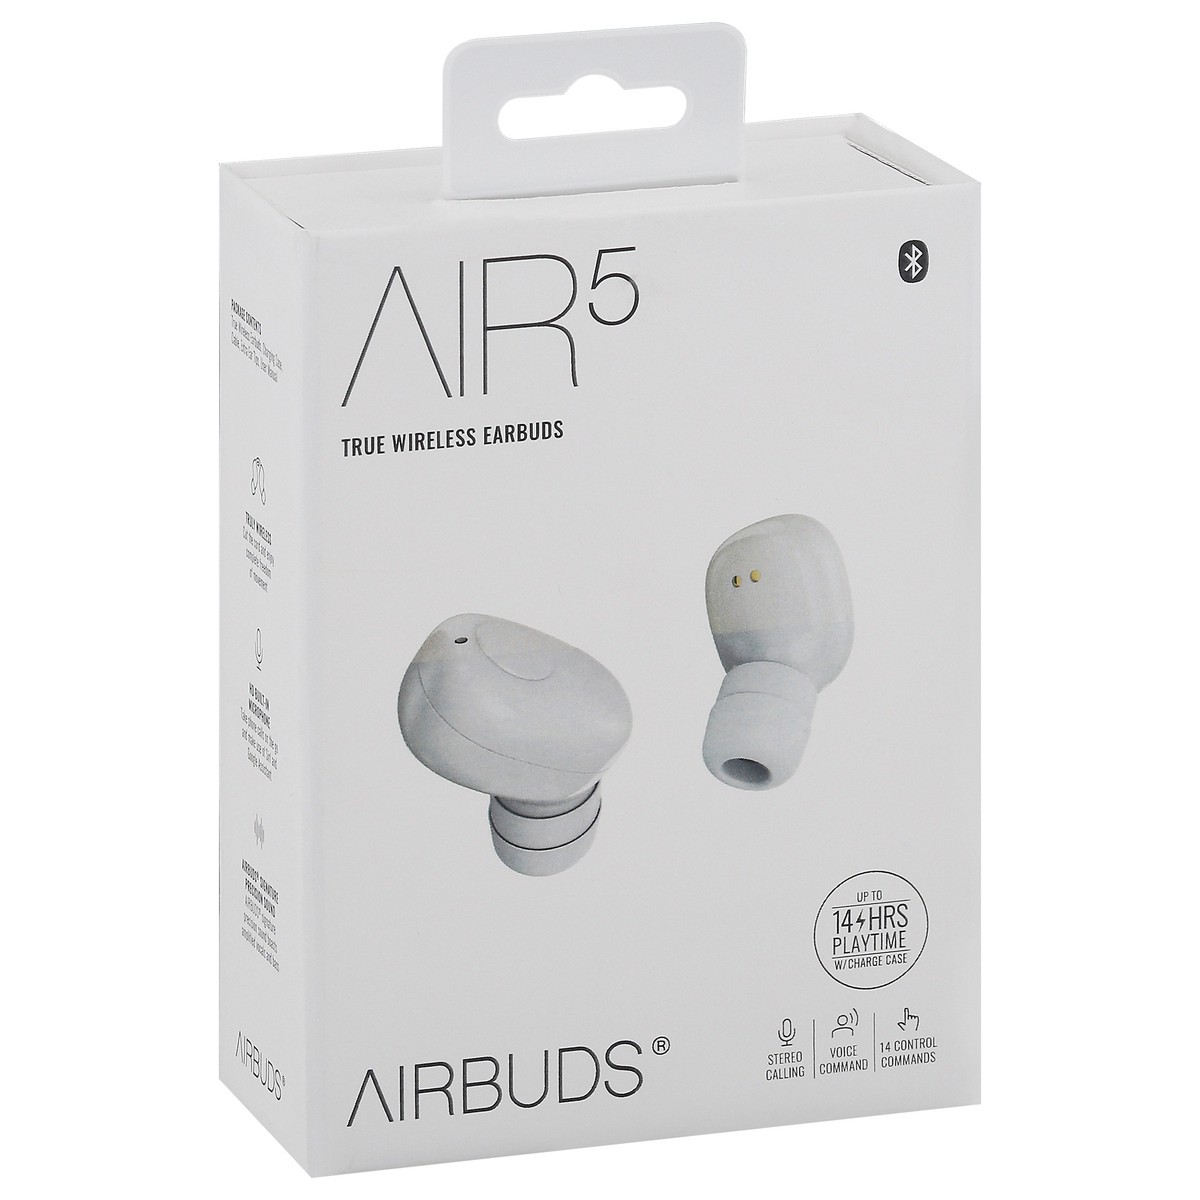 slide 6 of 9, Airbuds Air5 True Wireless Earbuds 1 ea Box, 1 ct